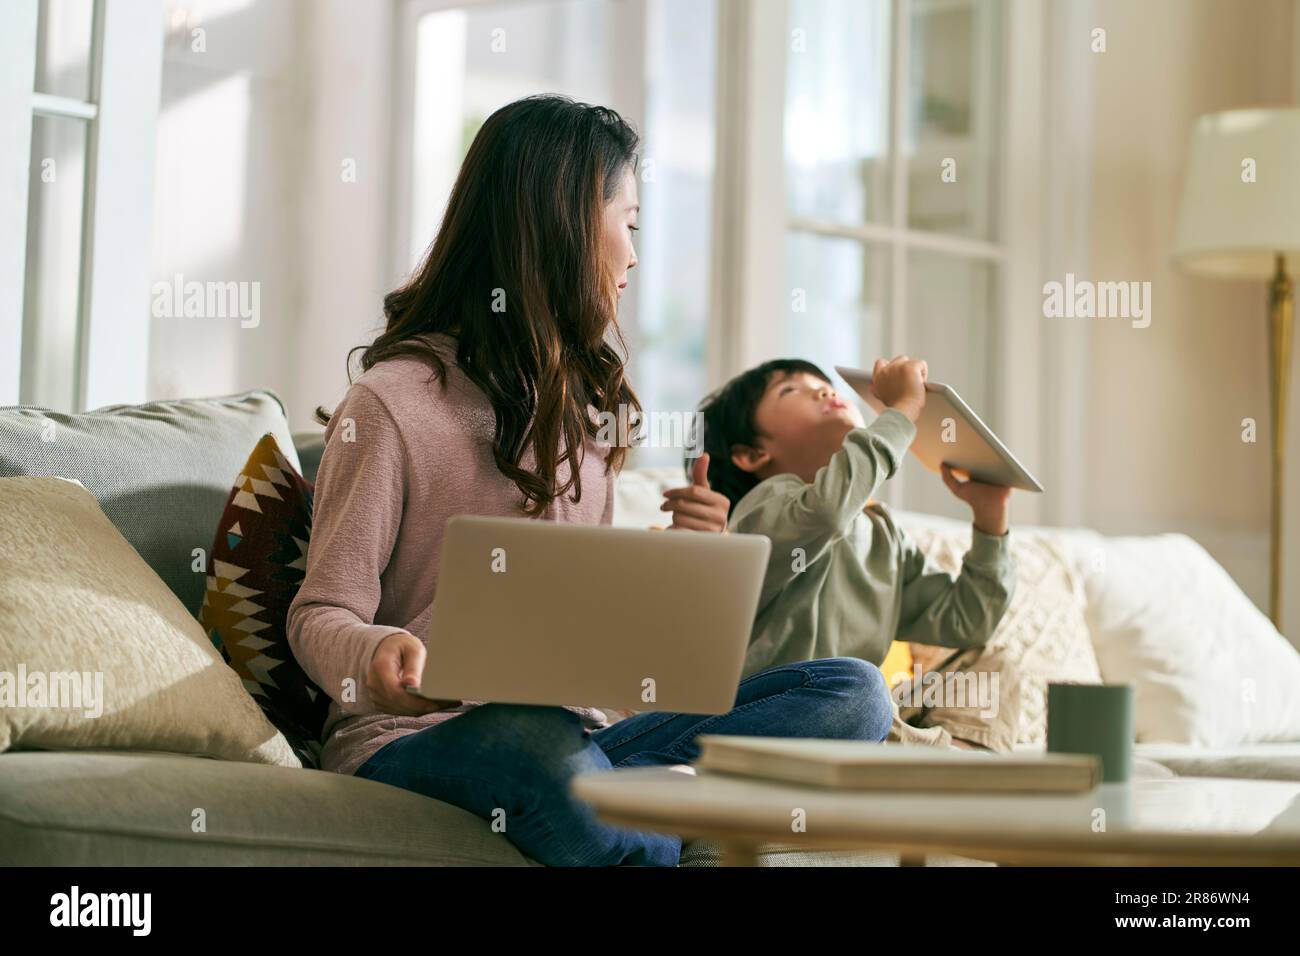 young asian businesswoman mother trying to work at home annoyed by hyperactive son Stock Photo